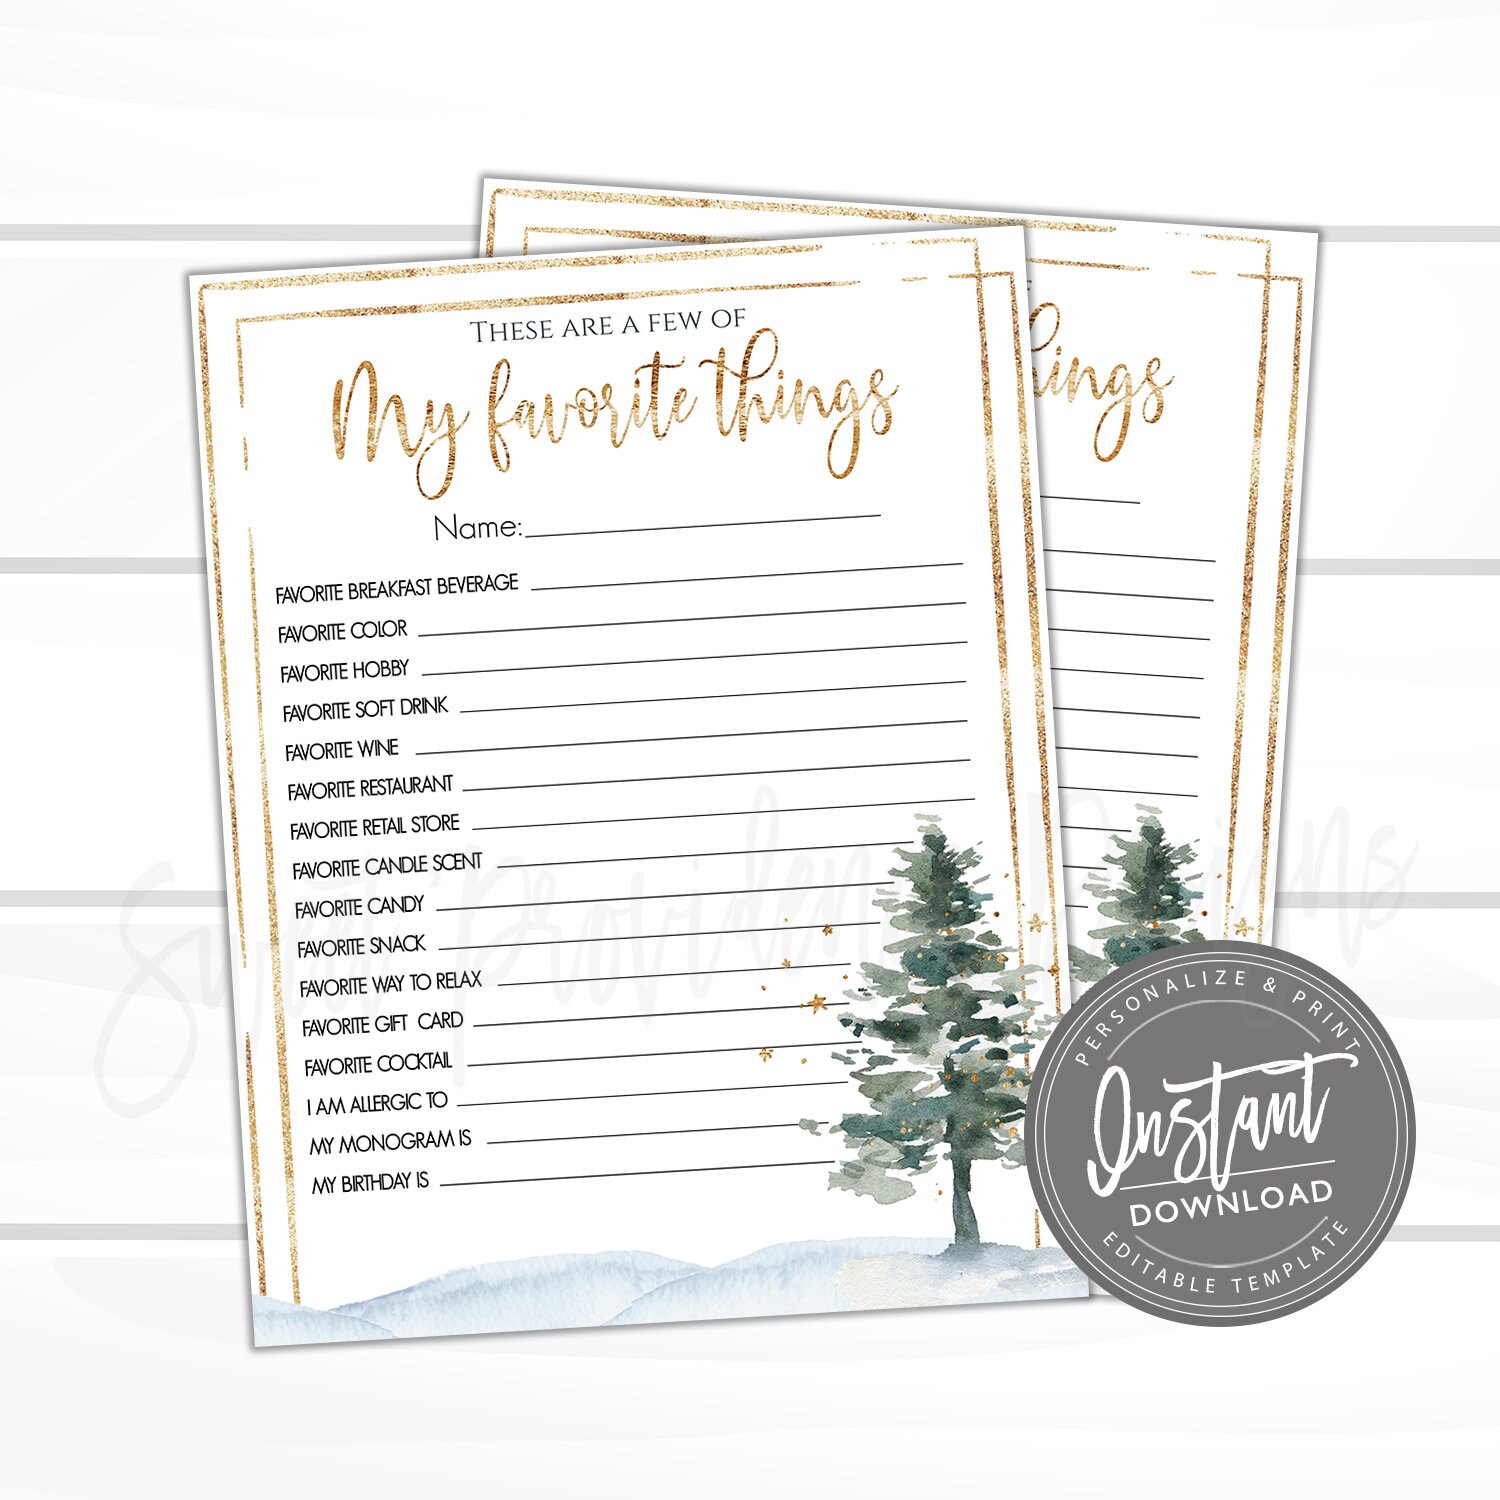 https://sweetprovidence.com/wp-content/uploads/2022/04/editable-christmas-friends-favorite-things-friend-questionnaire-survey-few-of-my-favorite-things-gift-letter-appreciation-printable-6263071f.jpg